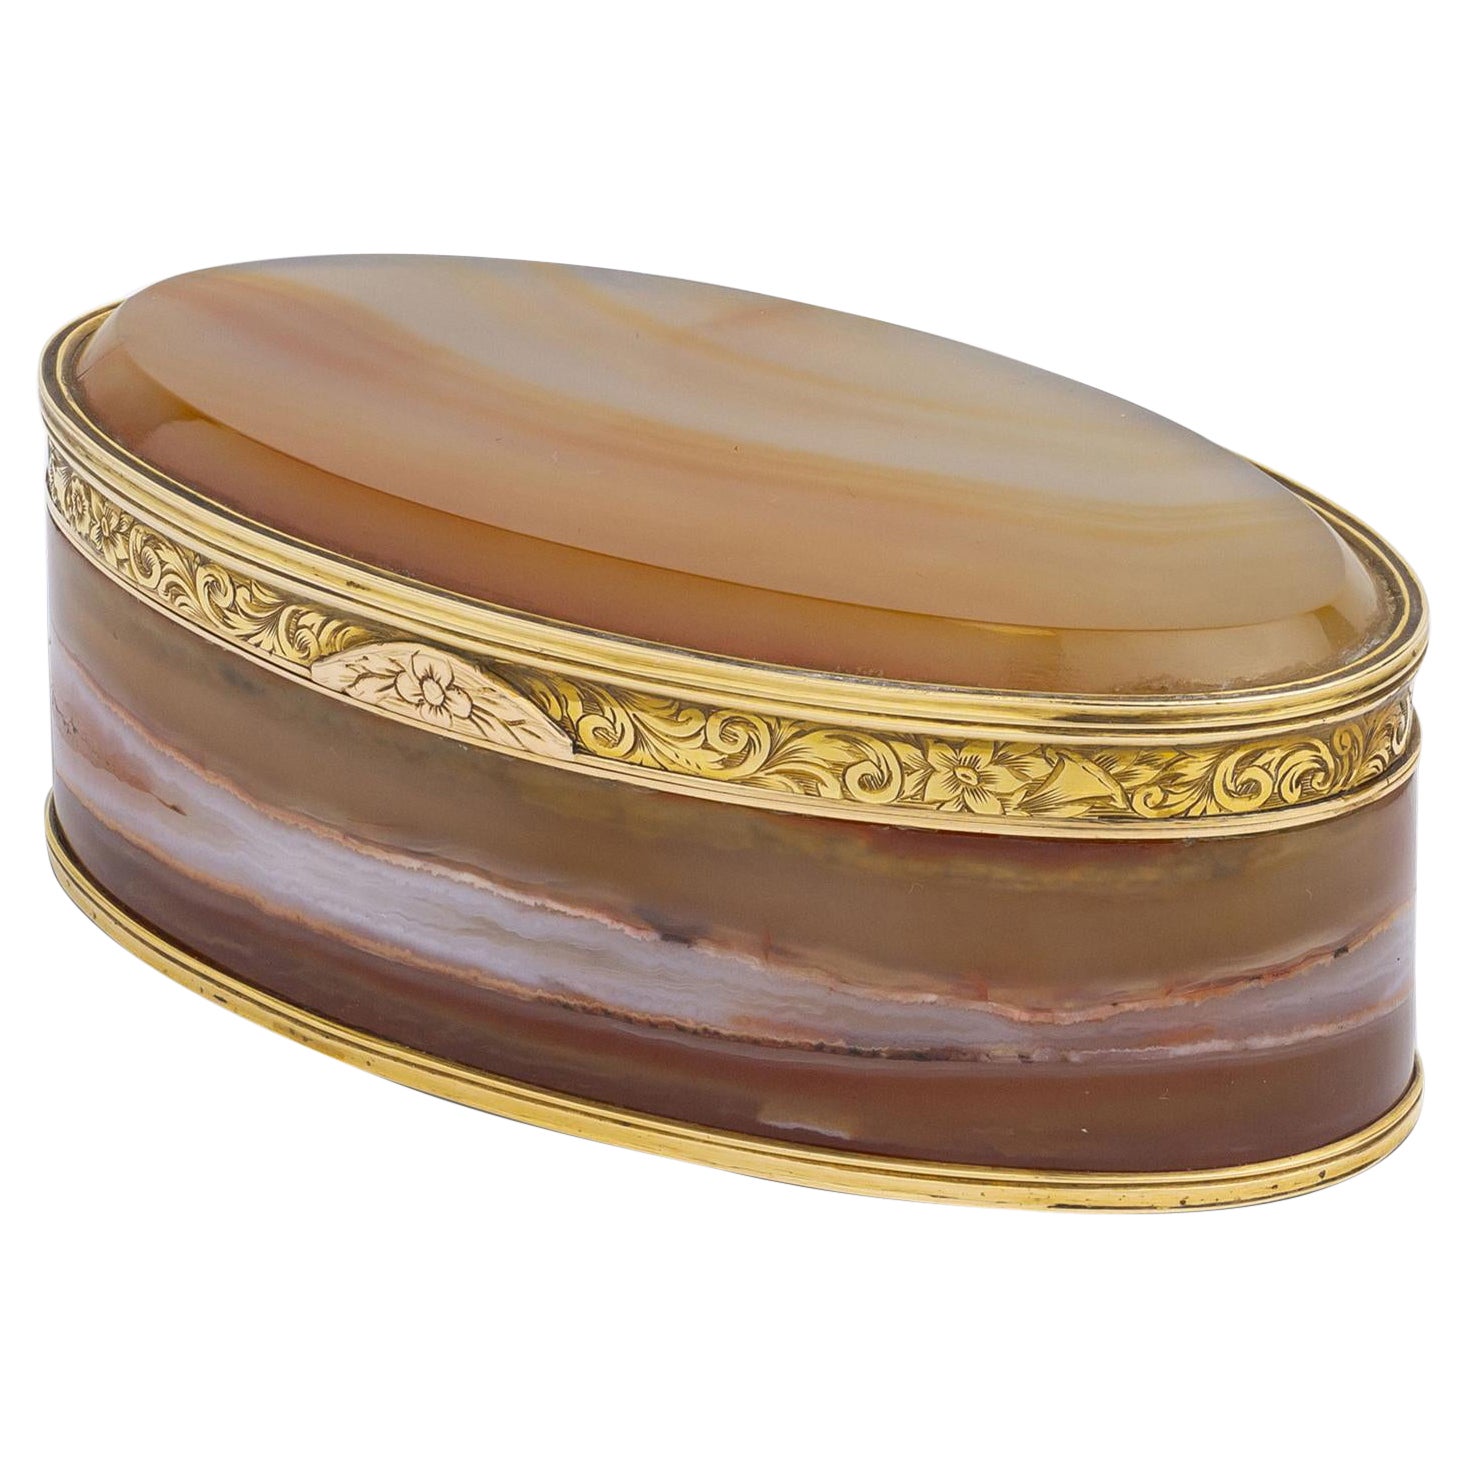 Oval Carnelian Agate Box With Gold Mounts